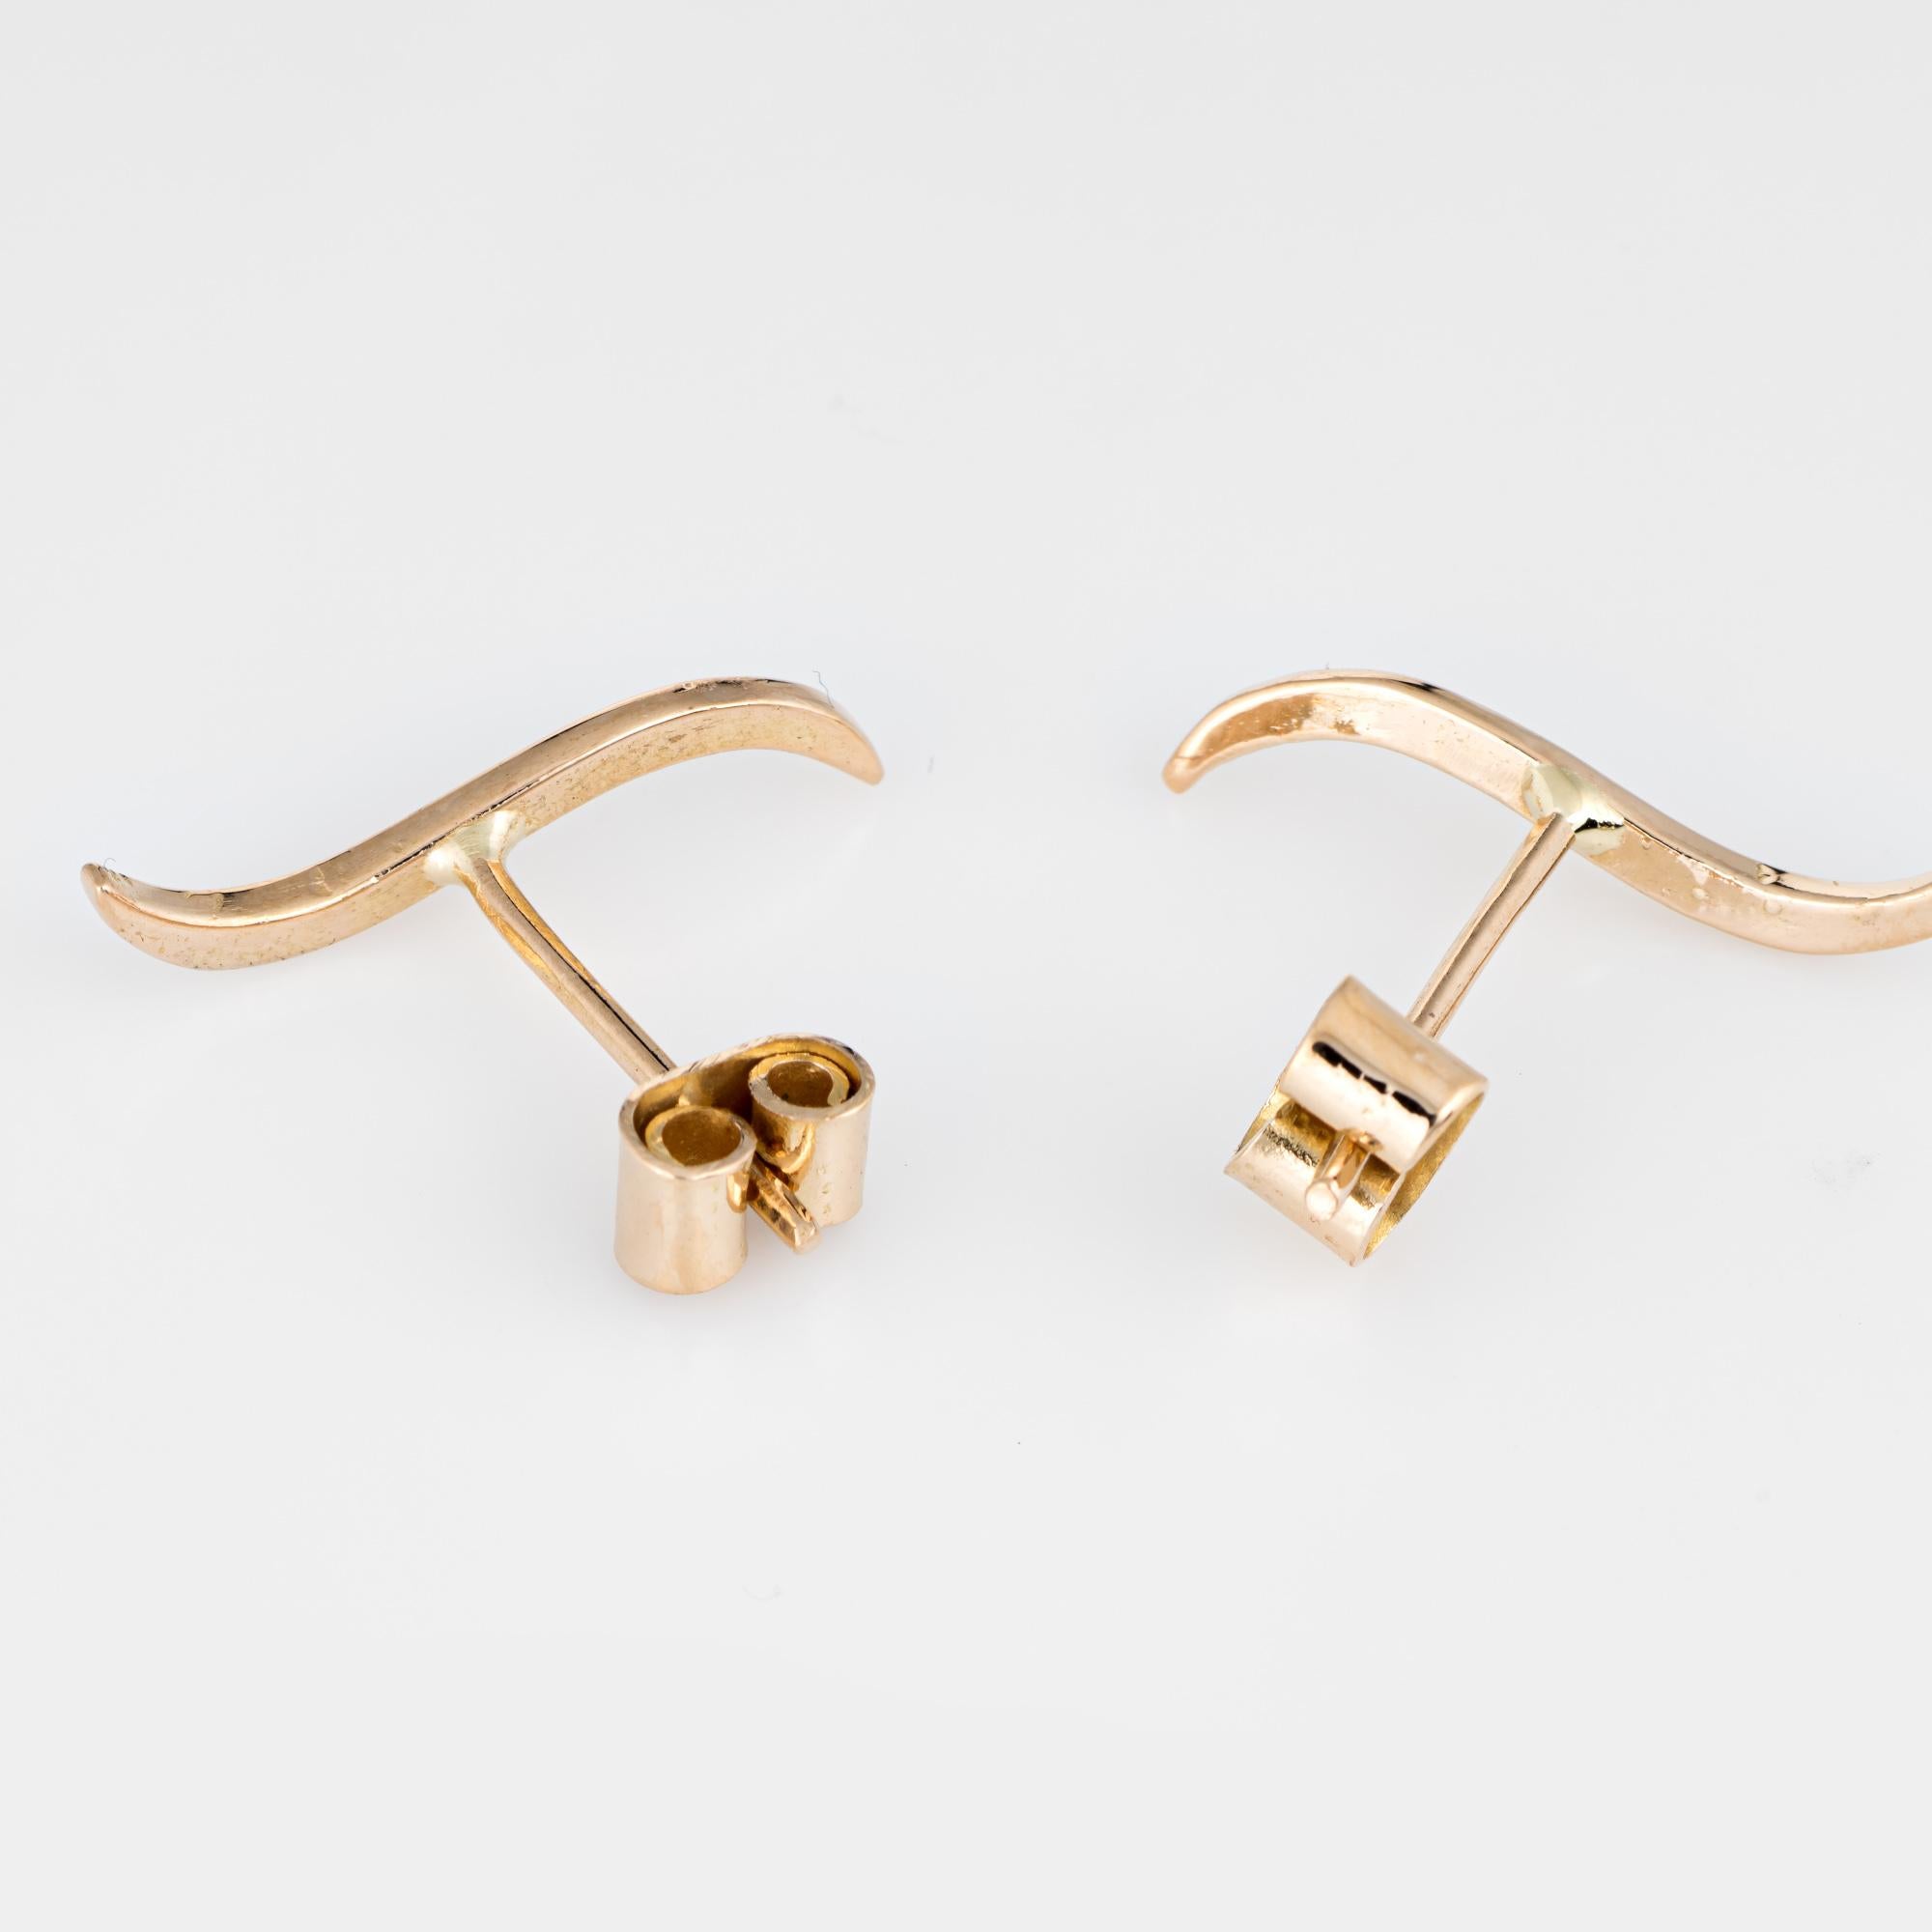 Stylish pair of freeform earrings crafted in 18k yellow gold. 

The earrings are designed in a freeform style yet also can be worn as a letter 